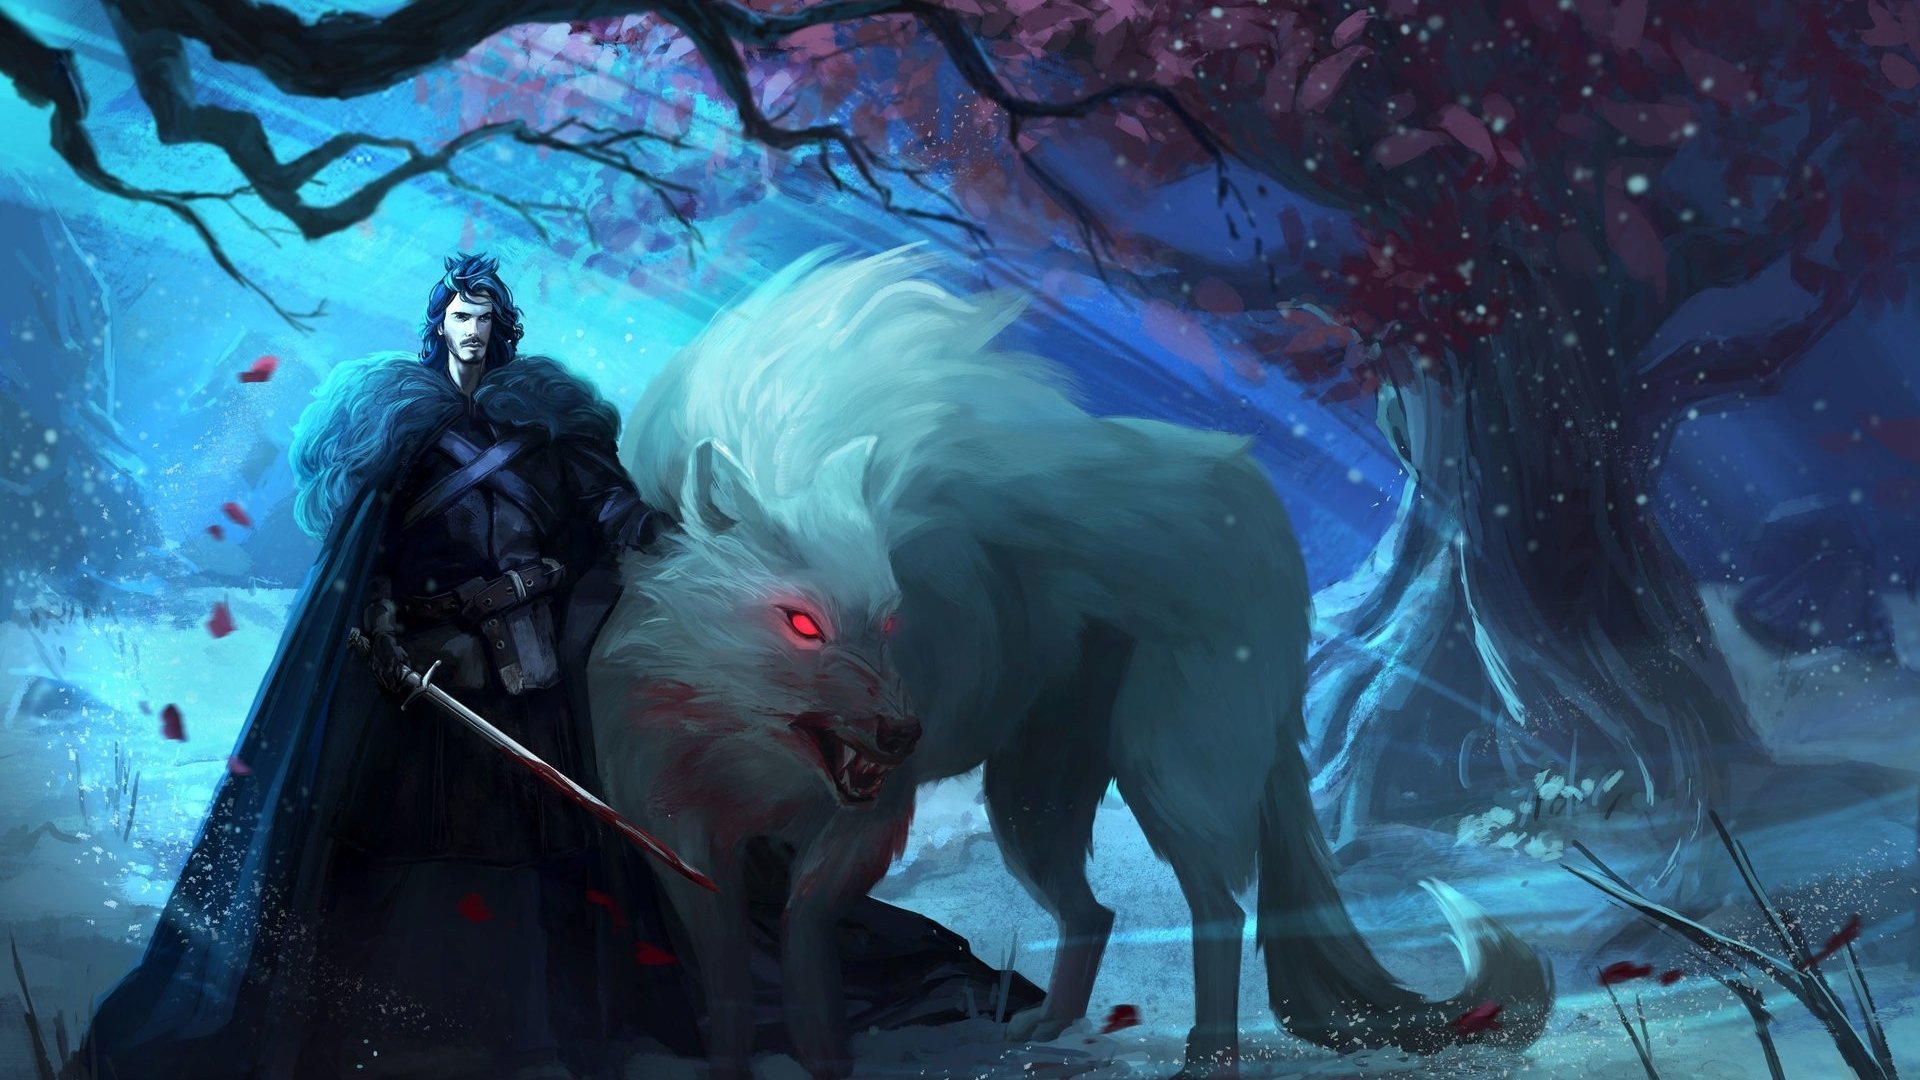 jon snow and ghost wallpaper,fictional character,illustration,darkness,cg artwork,fiction